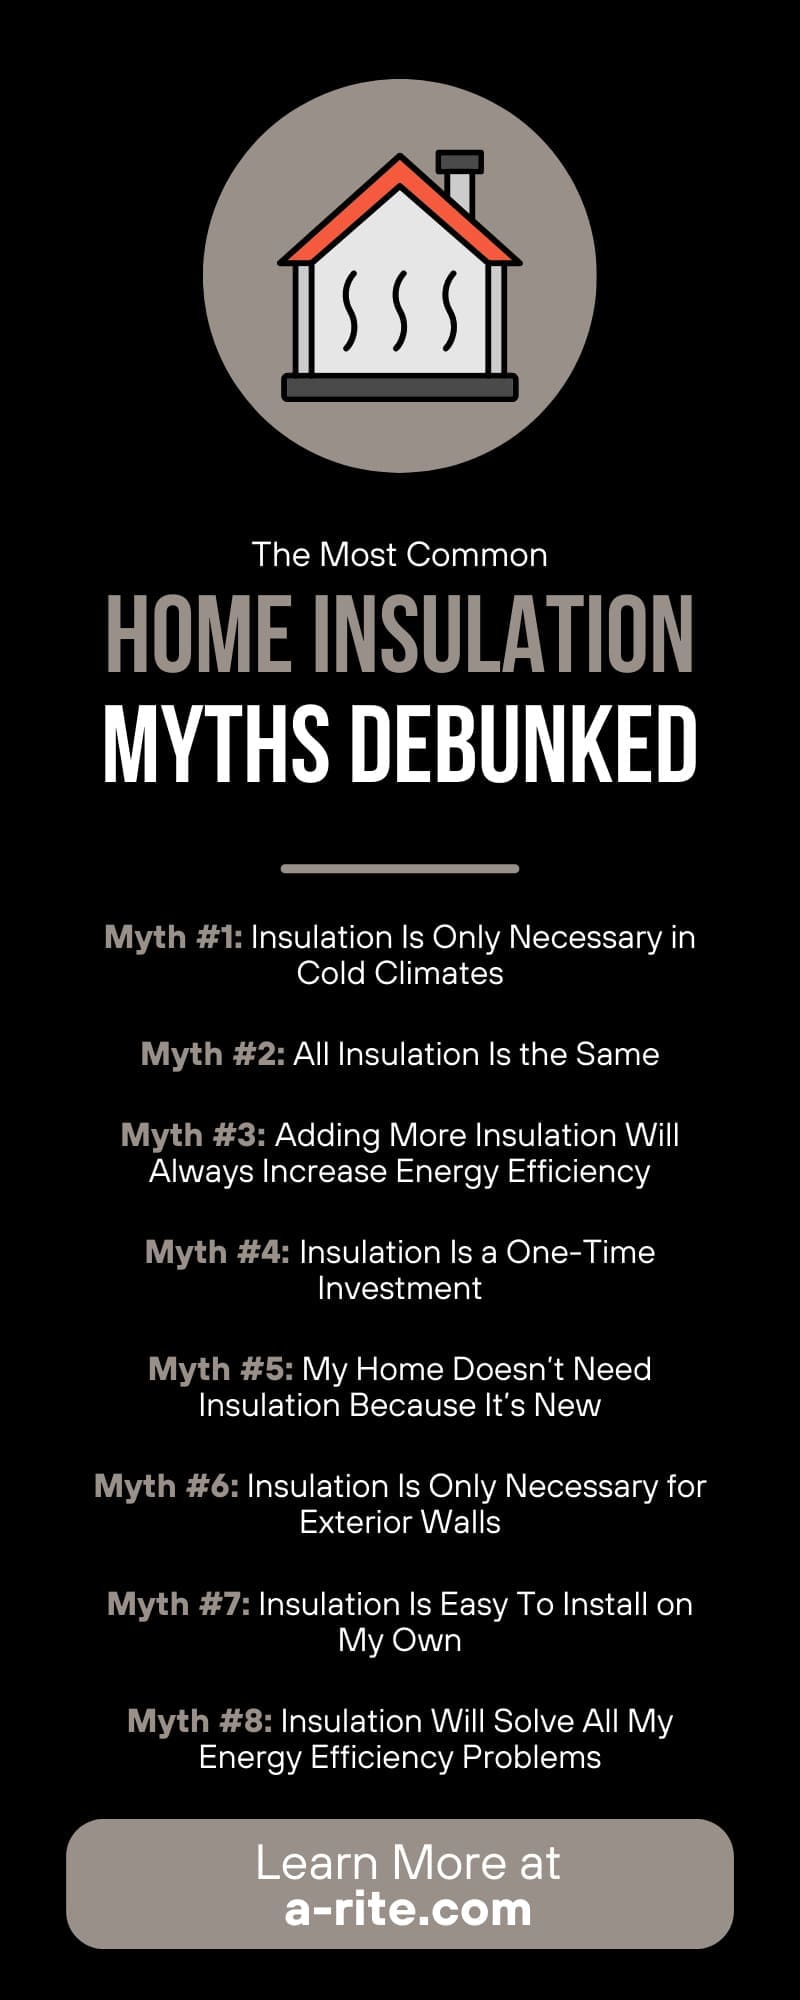 The Most Home Common Insulation Myths Debunked
